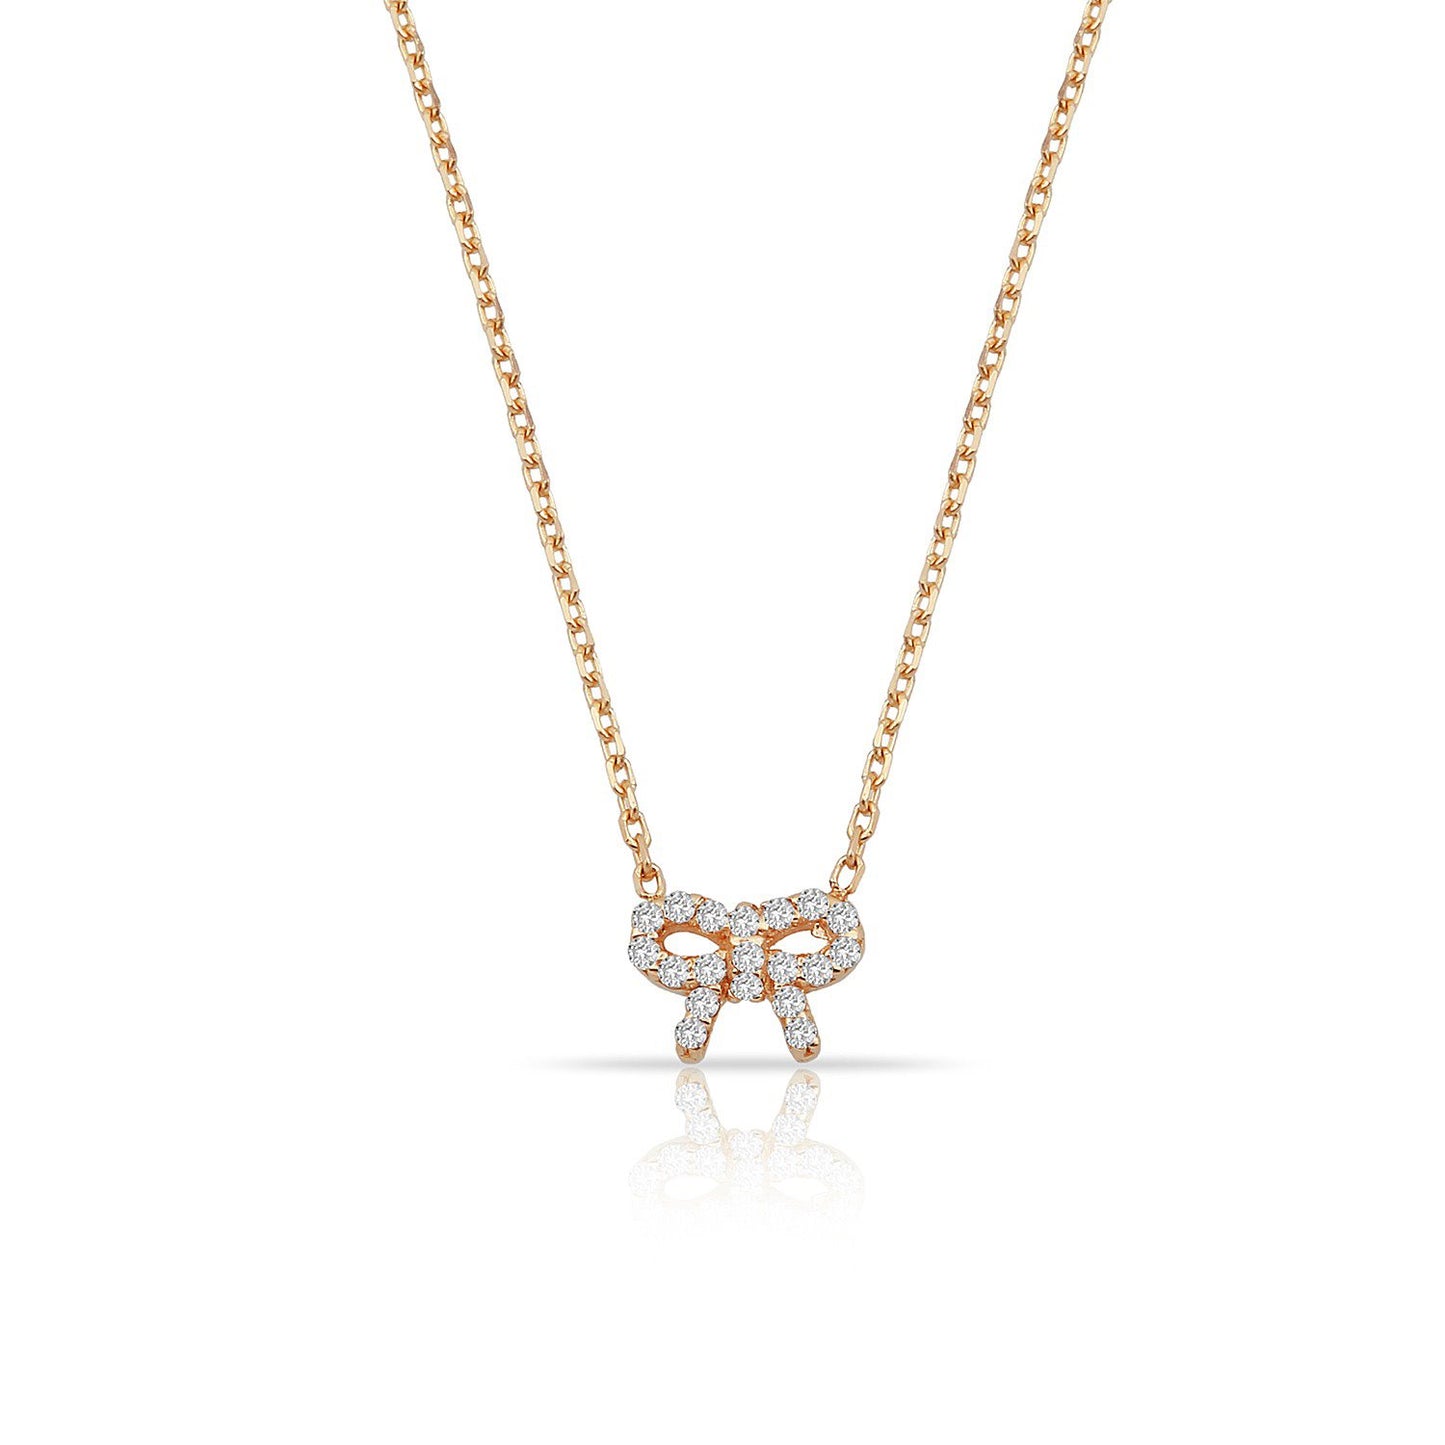 TSK Diamond Bow Necklace JEWELRY The Sis Kiss 14k Rose Gold